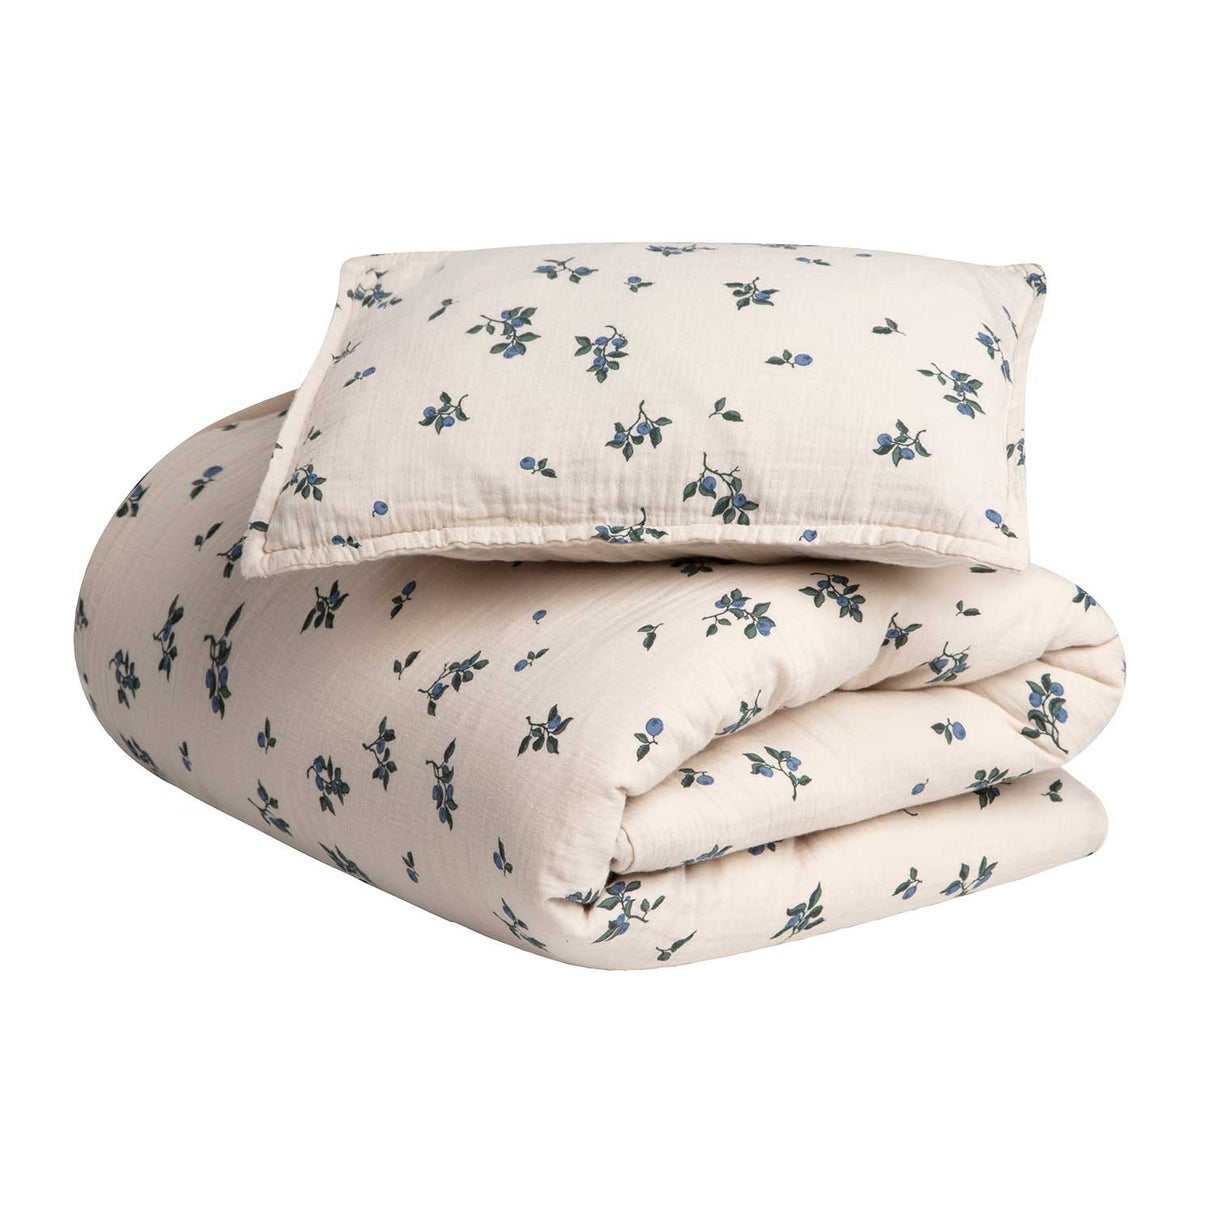 Garbo&amp;Friends Blueberry Muslin Bed Set Cot